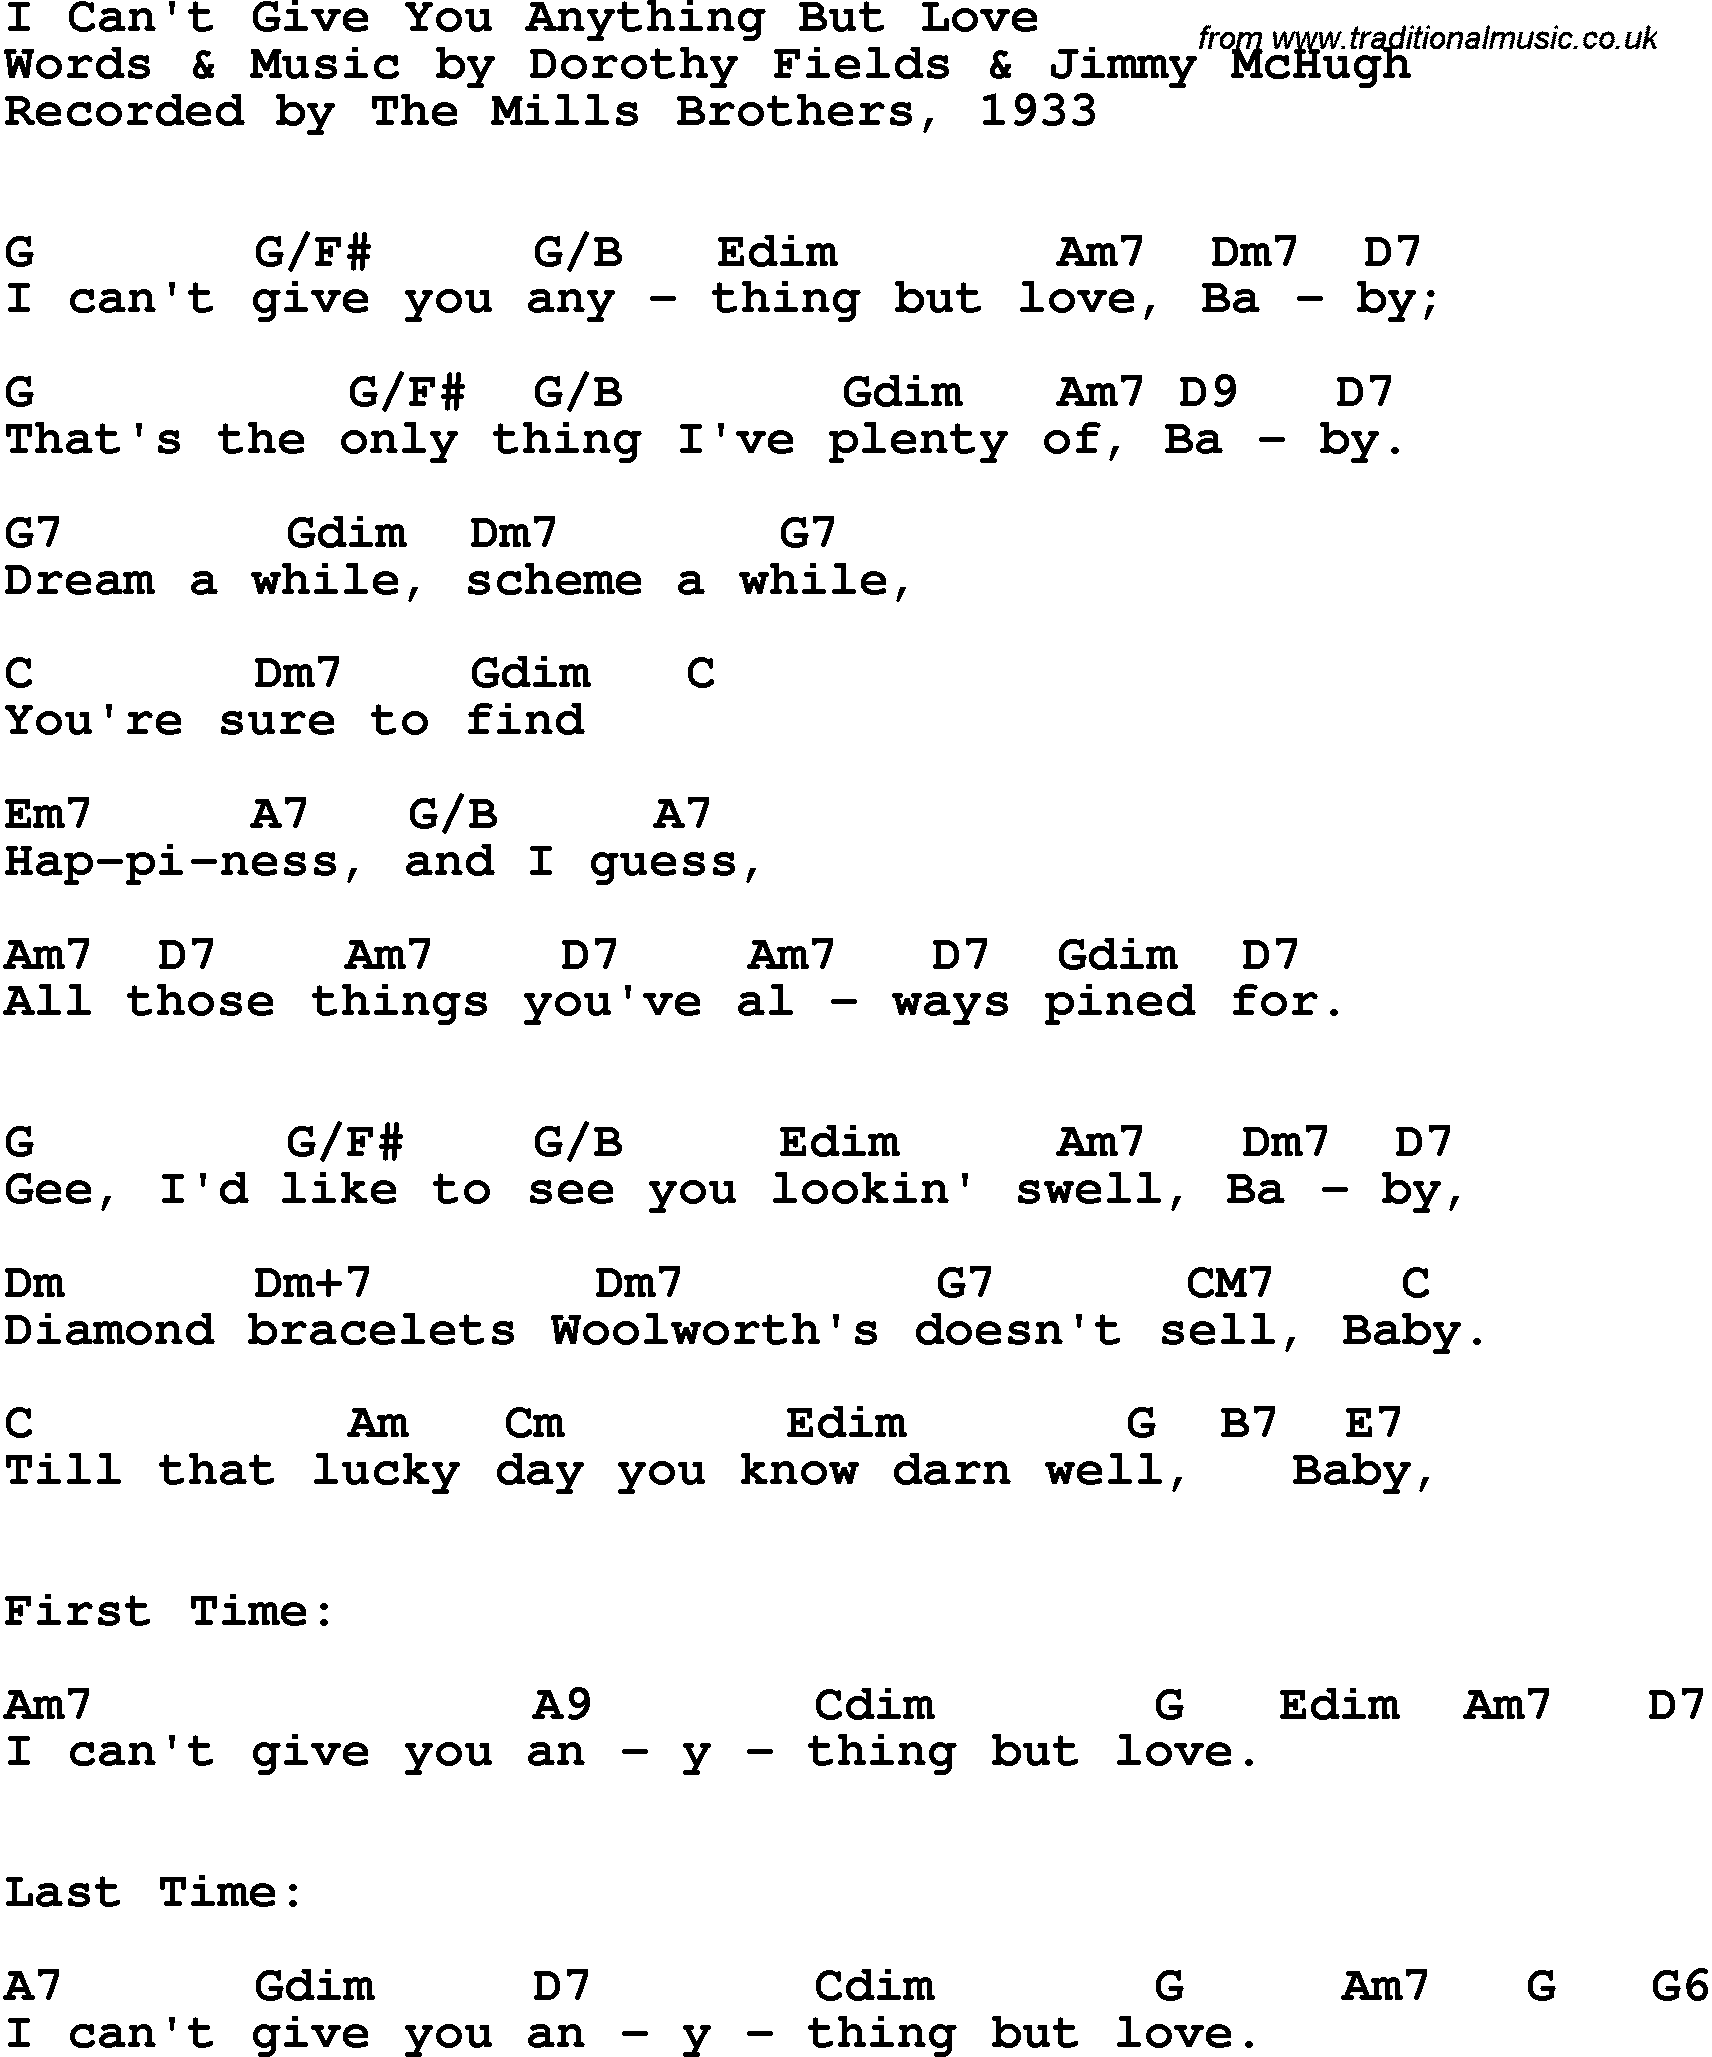 Song Lyrics with guitar chords for I Can't Give You Anything But Love - The Mills Brothers, 1933